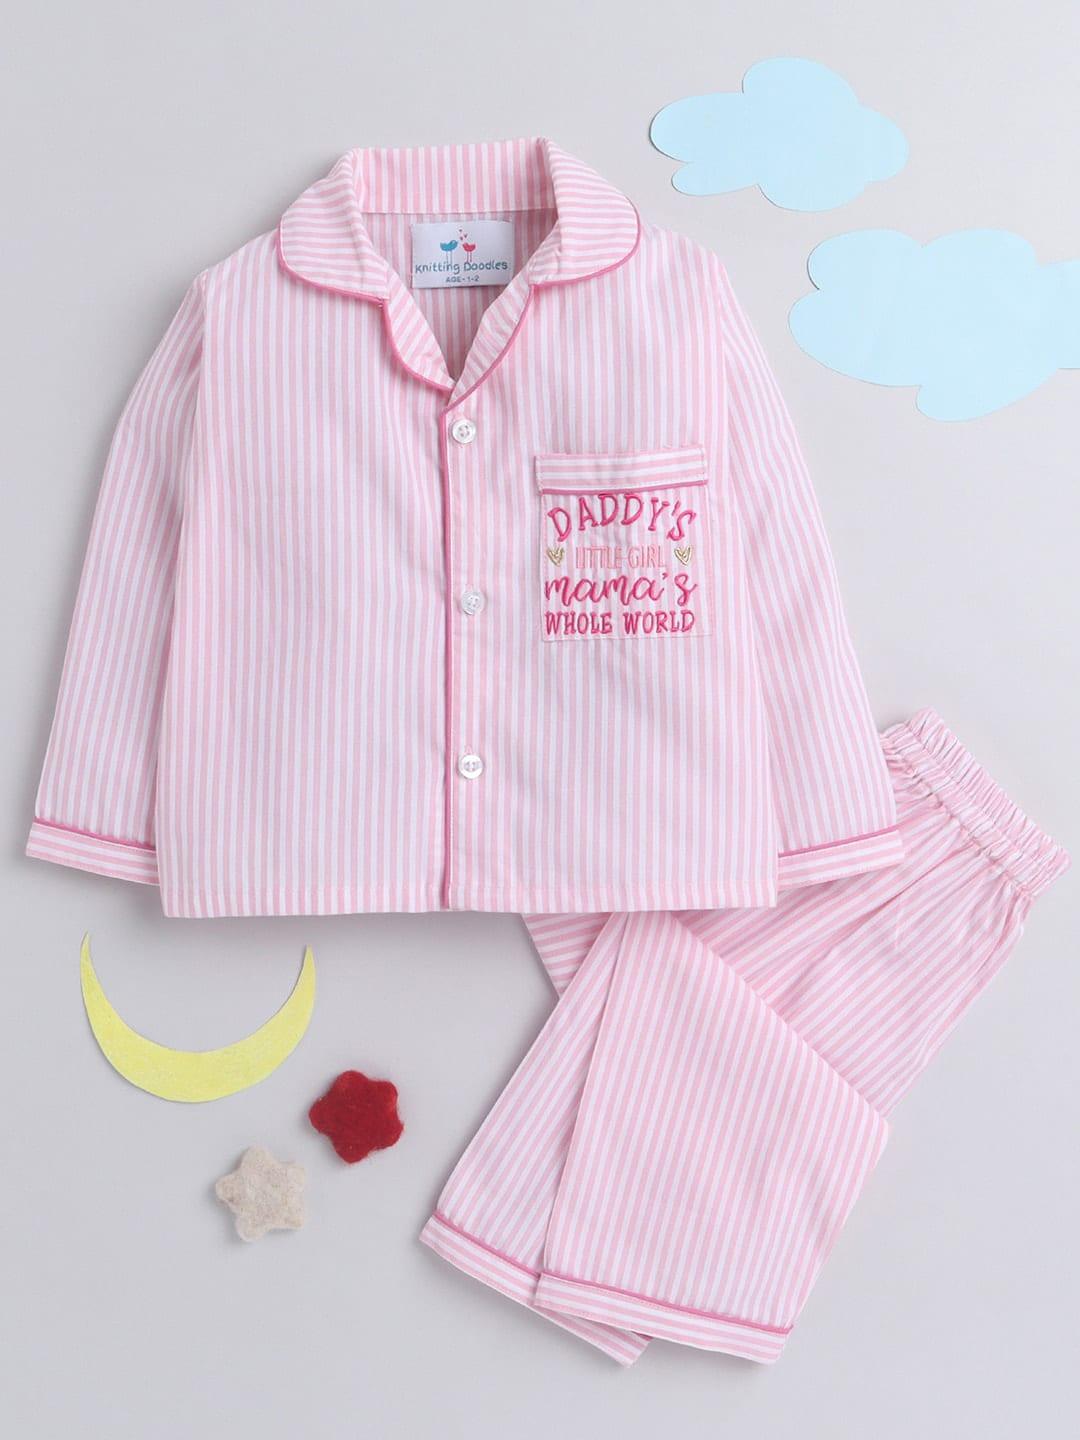 knitting-doodles-kids-pink-&-off-white-striped-night-suit